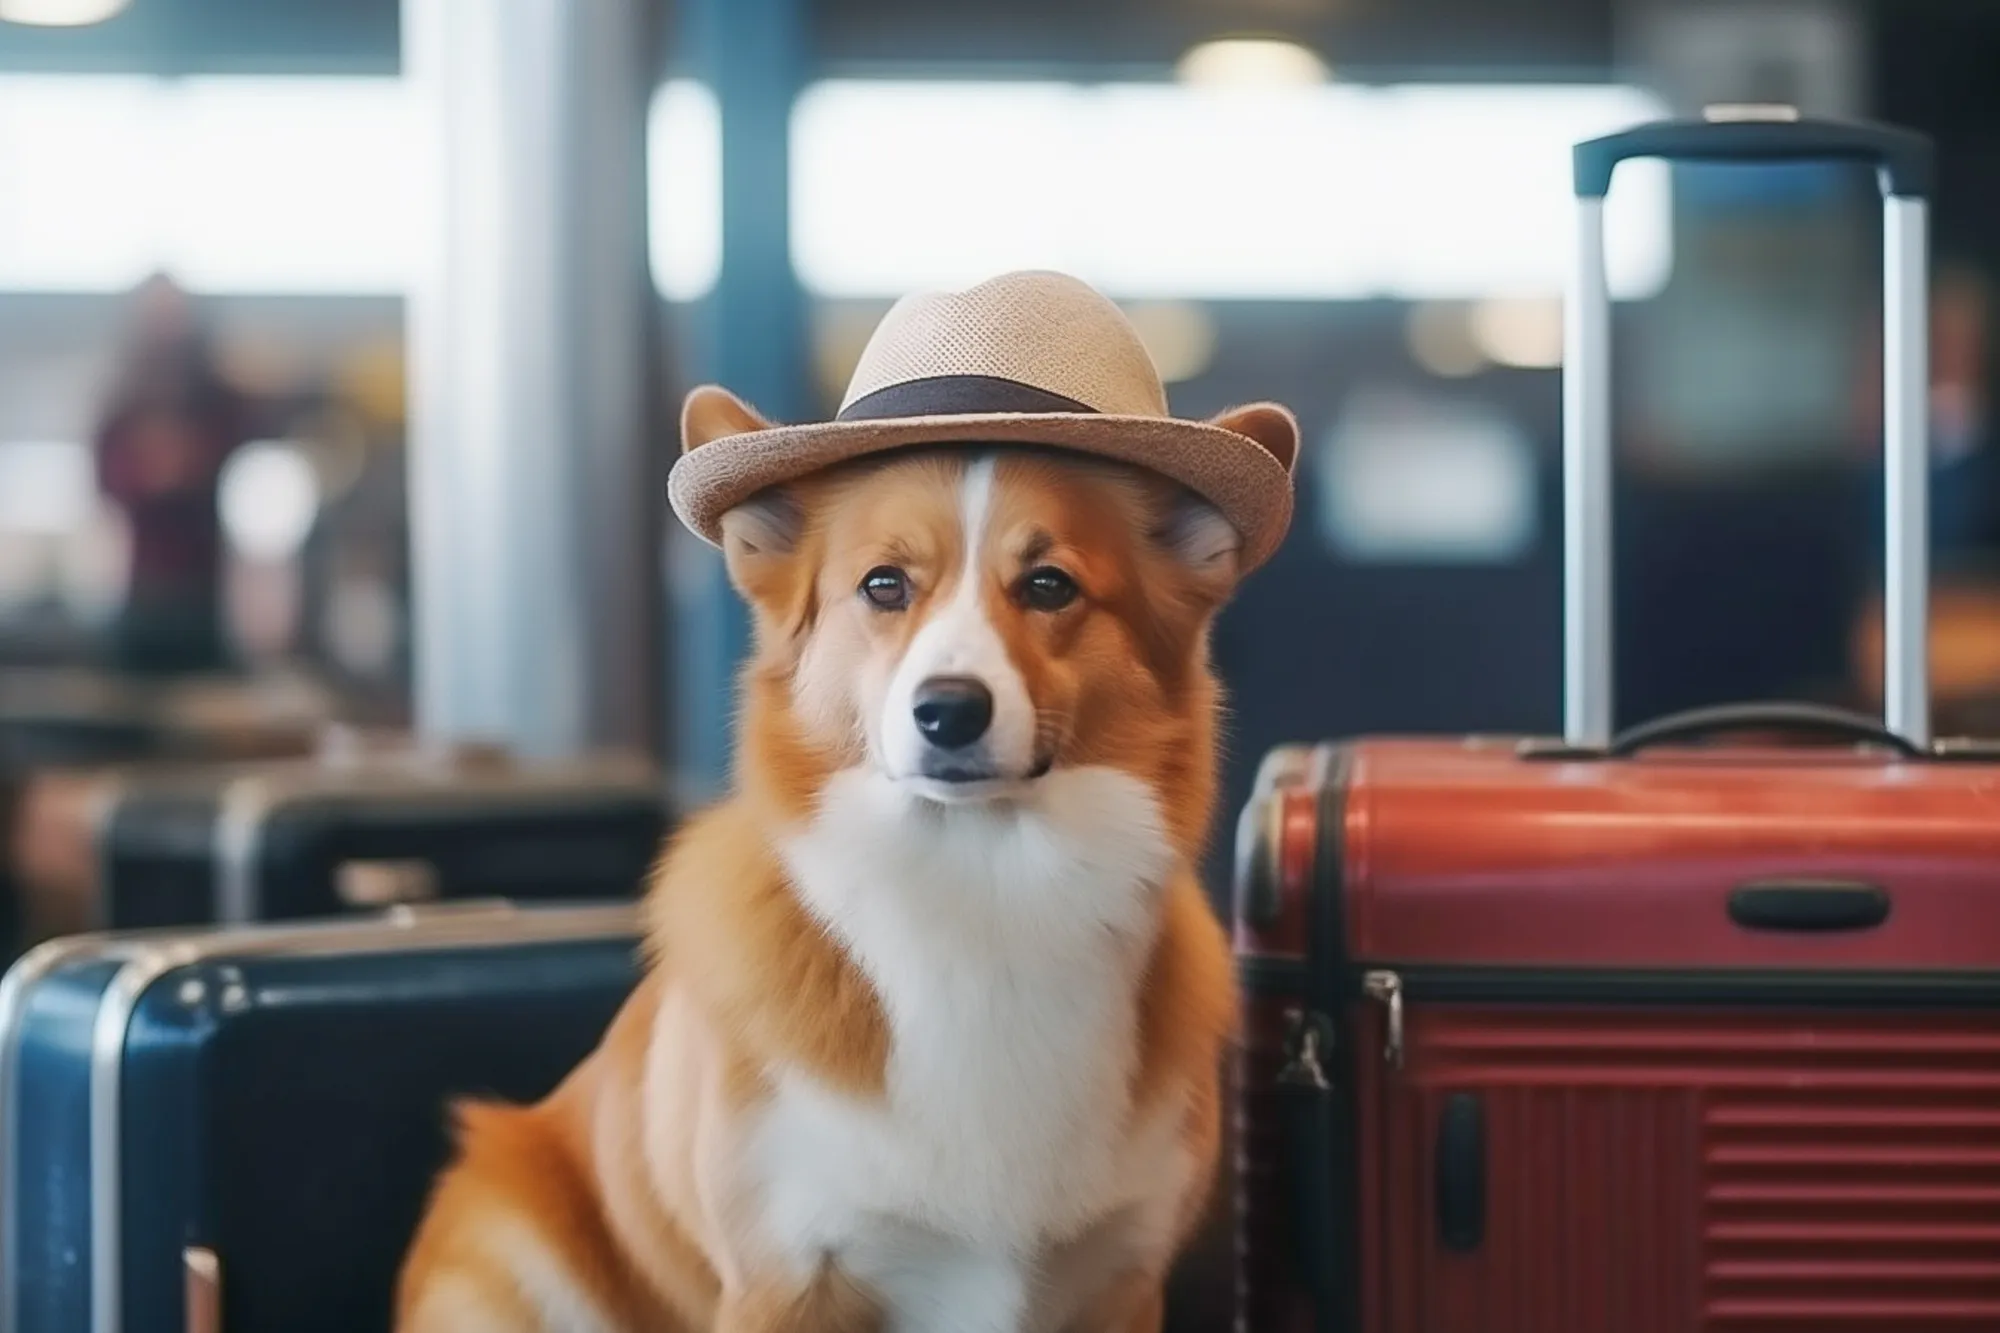 Which Airlines Allow You to Buy a Seat for Your Dog?